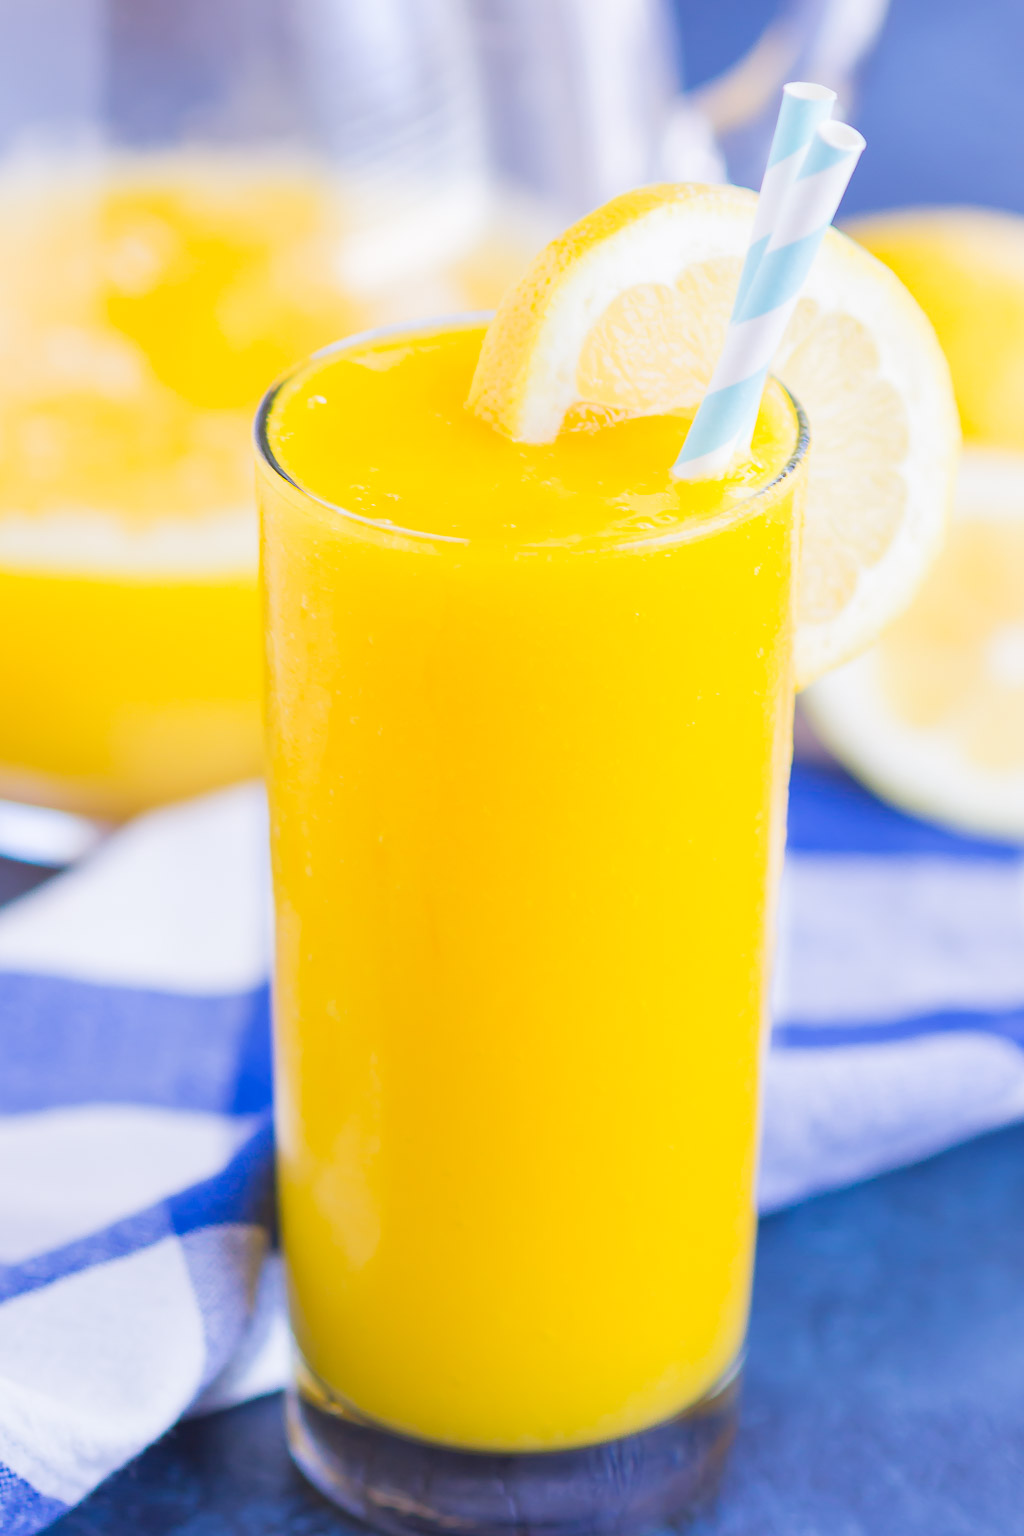 Frozen Mango Lemonade is a delicious way to beat the summer heat. With just four ingredients and ready in less than 5 minutes, you'll love the cool and creamy flavor of sweet mango and tart lemons! #lemonade #frozenlemonade #mangolemonade